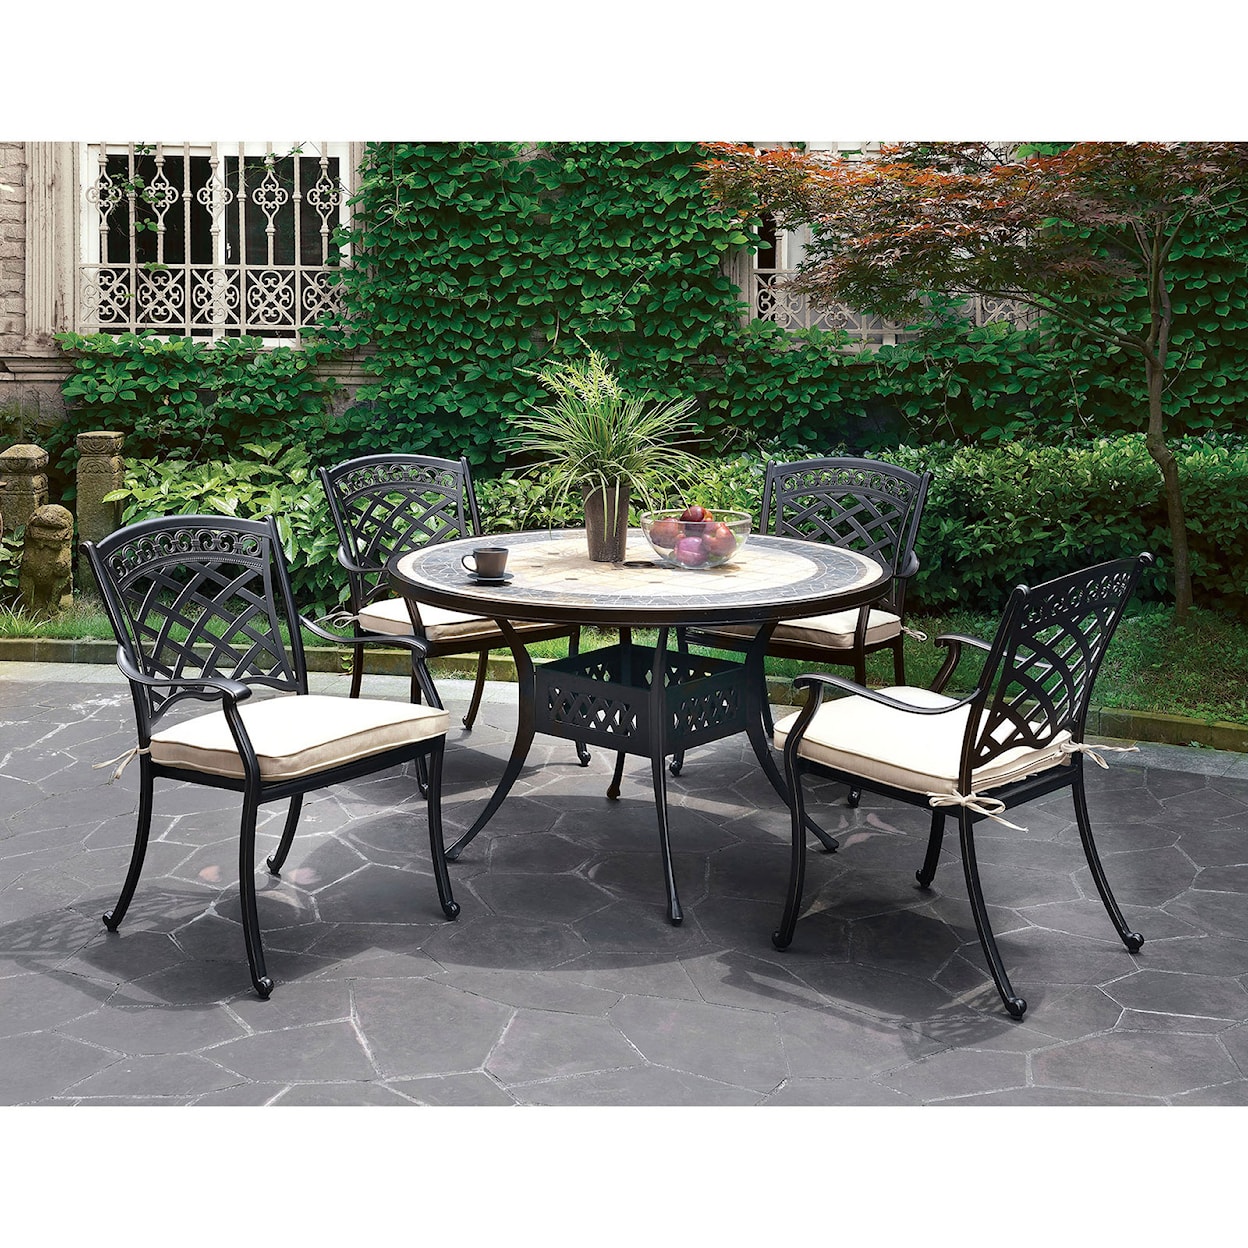 Furniture of America Charissa Round Table + 4 Arm Chairs